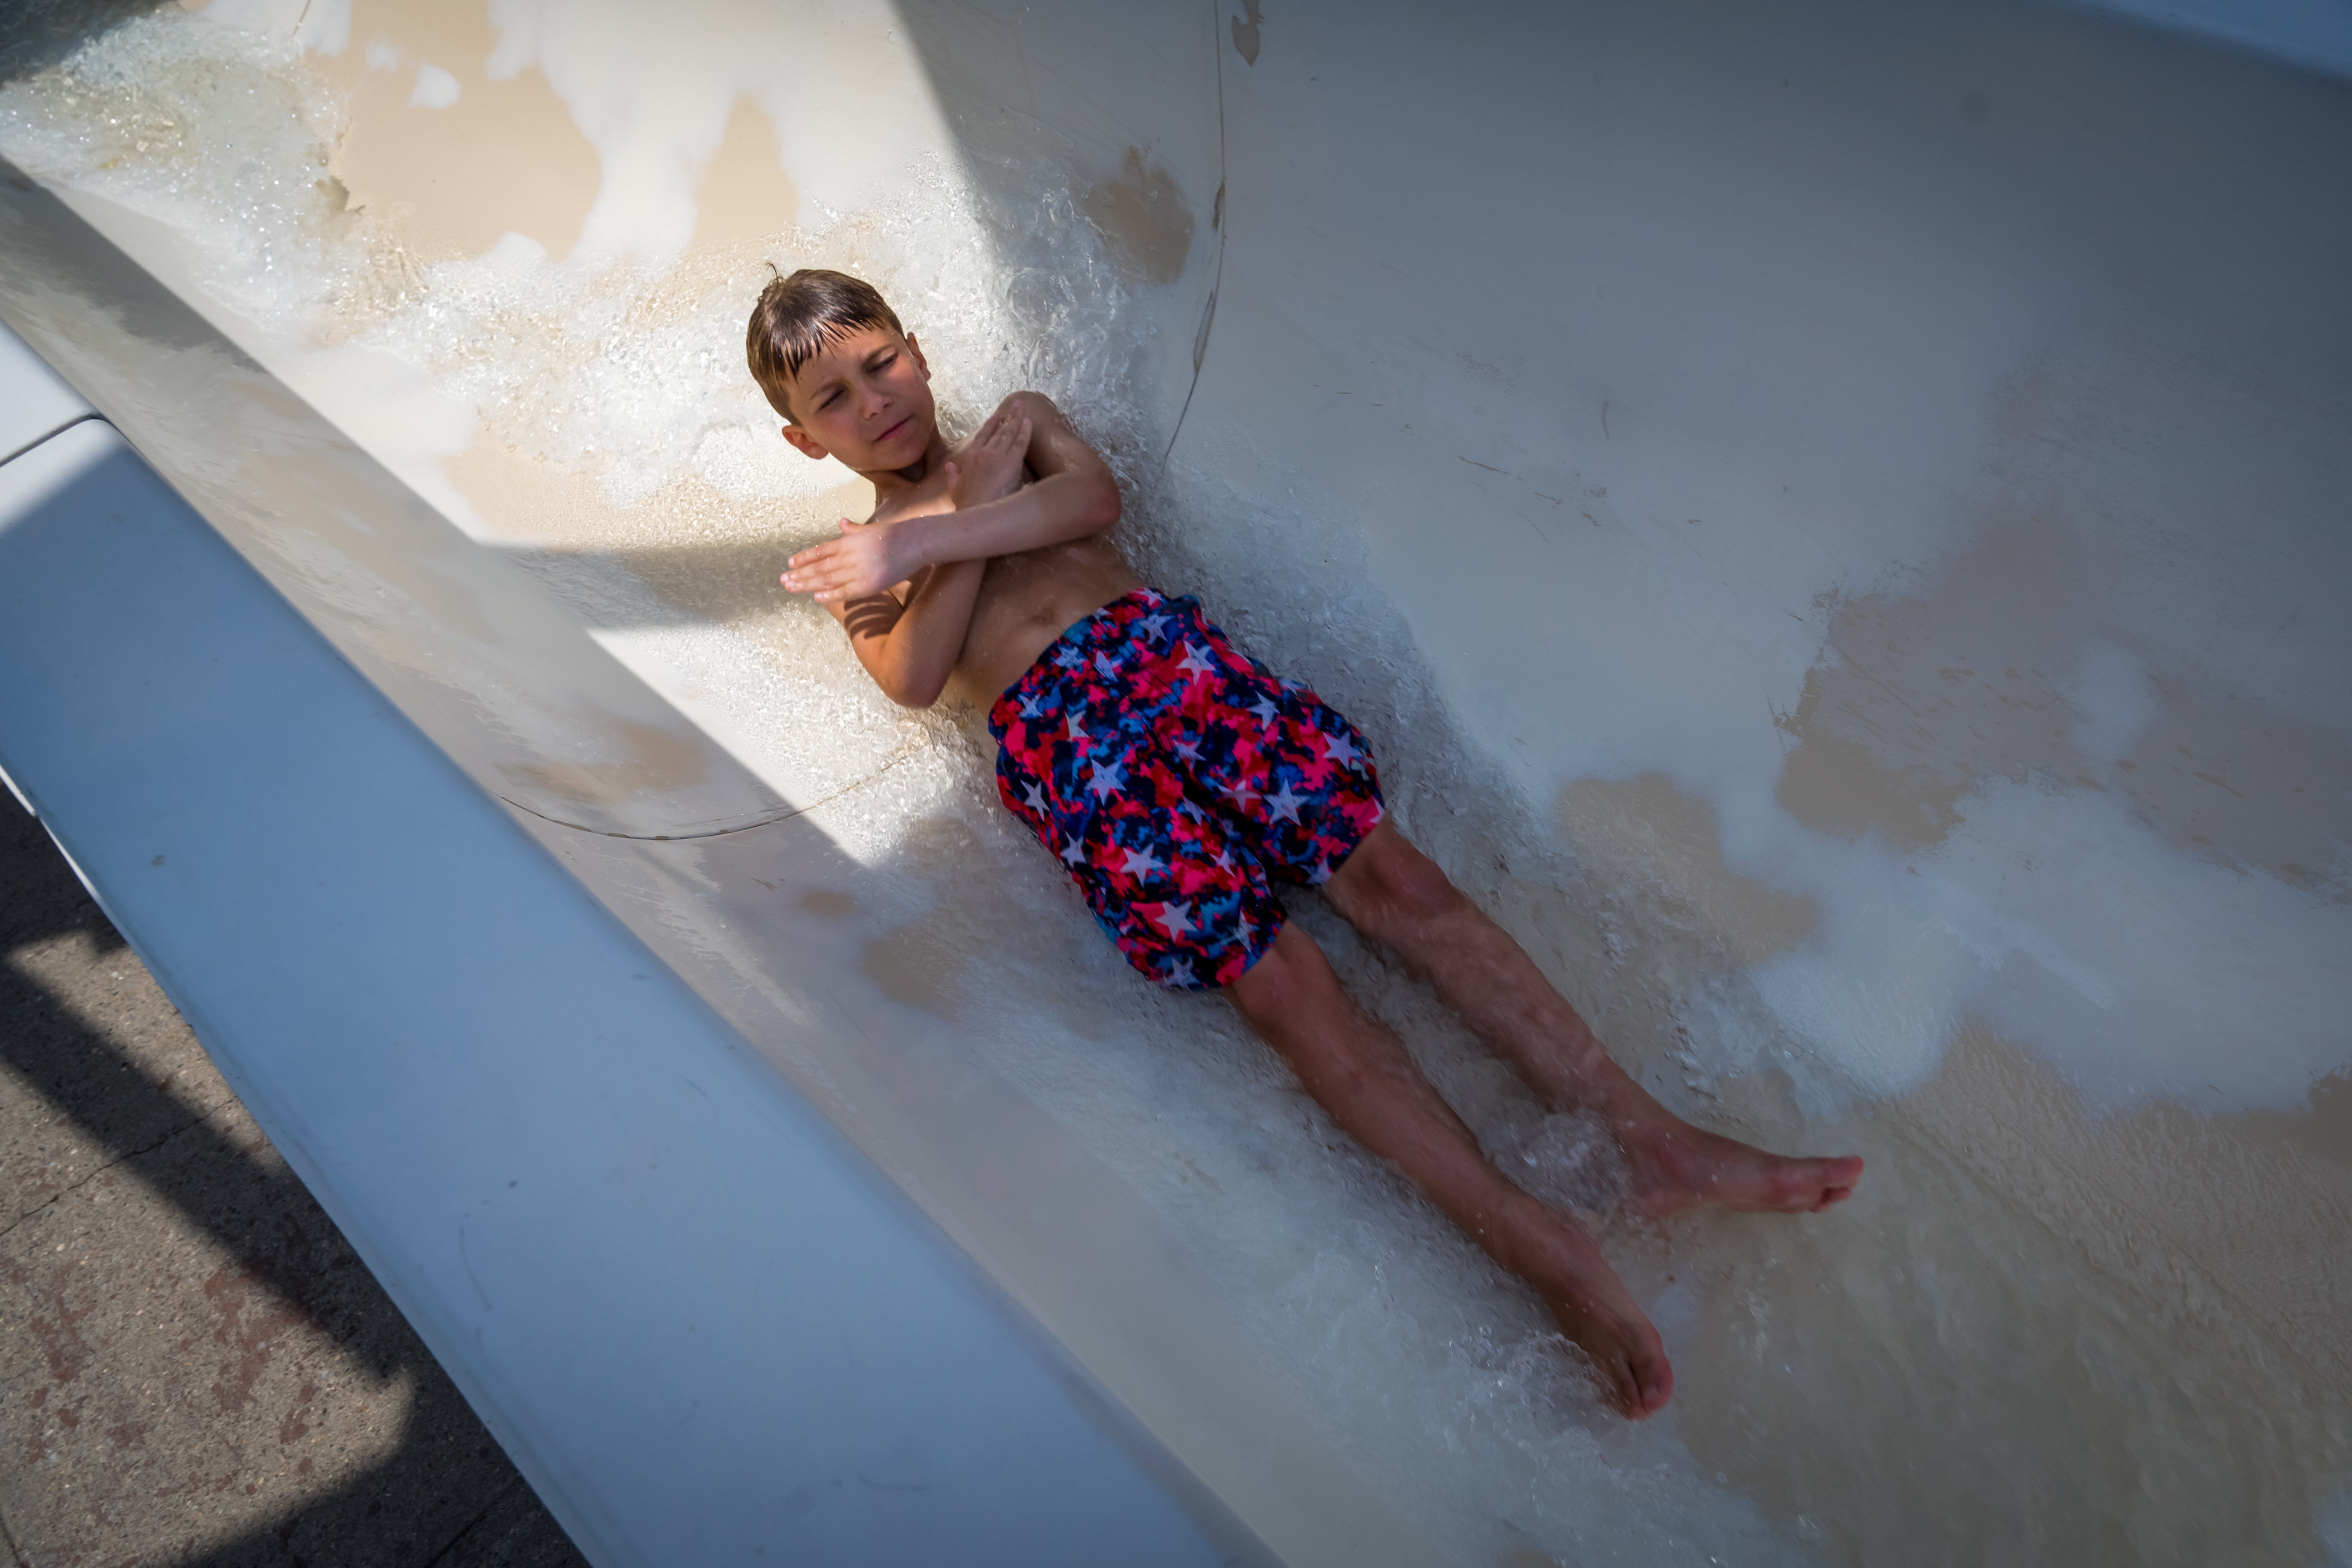 A boy mid water slide with arms crossed and rippled water rushing around him.